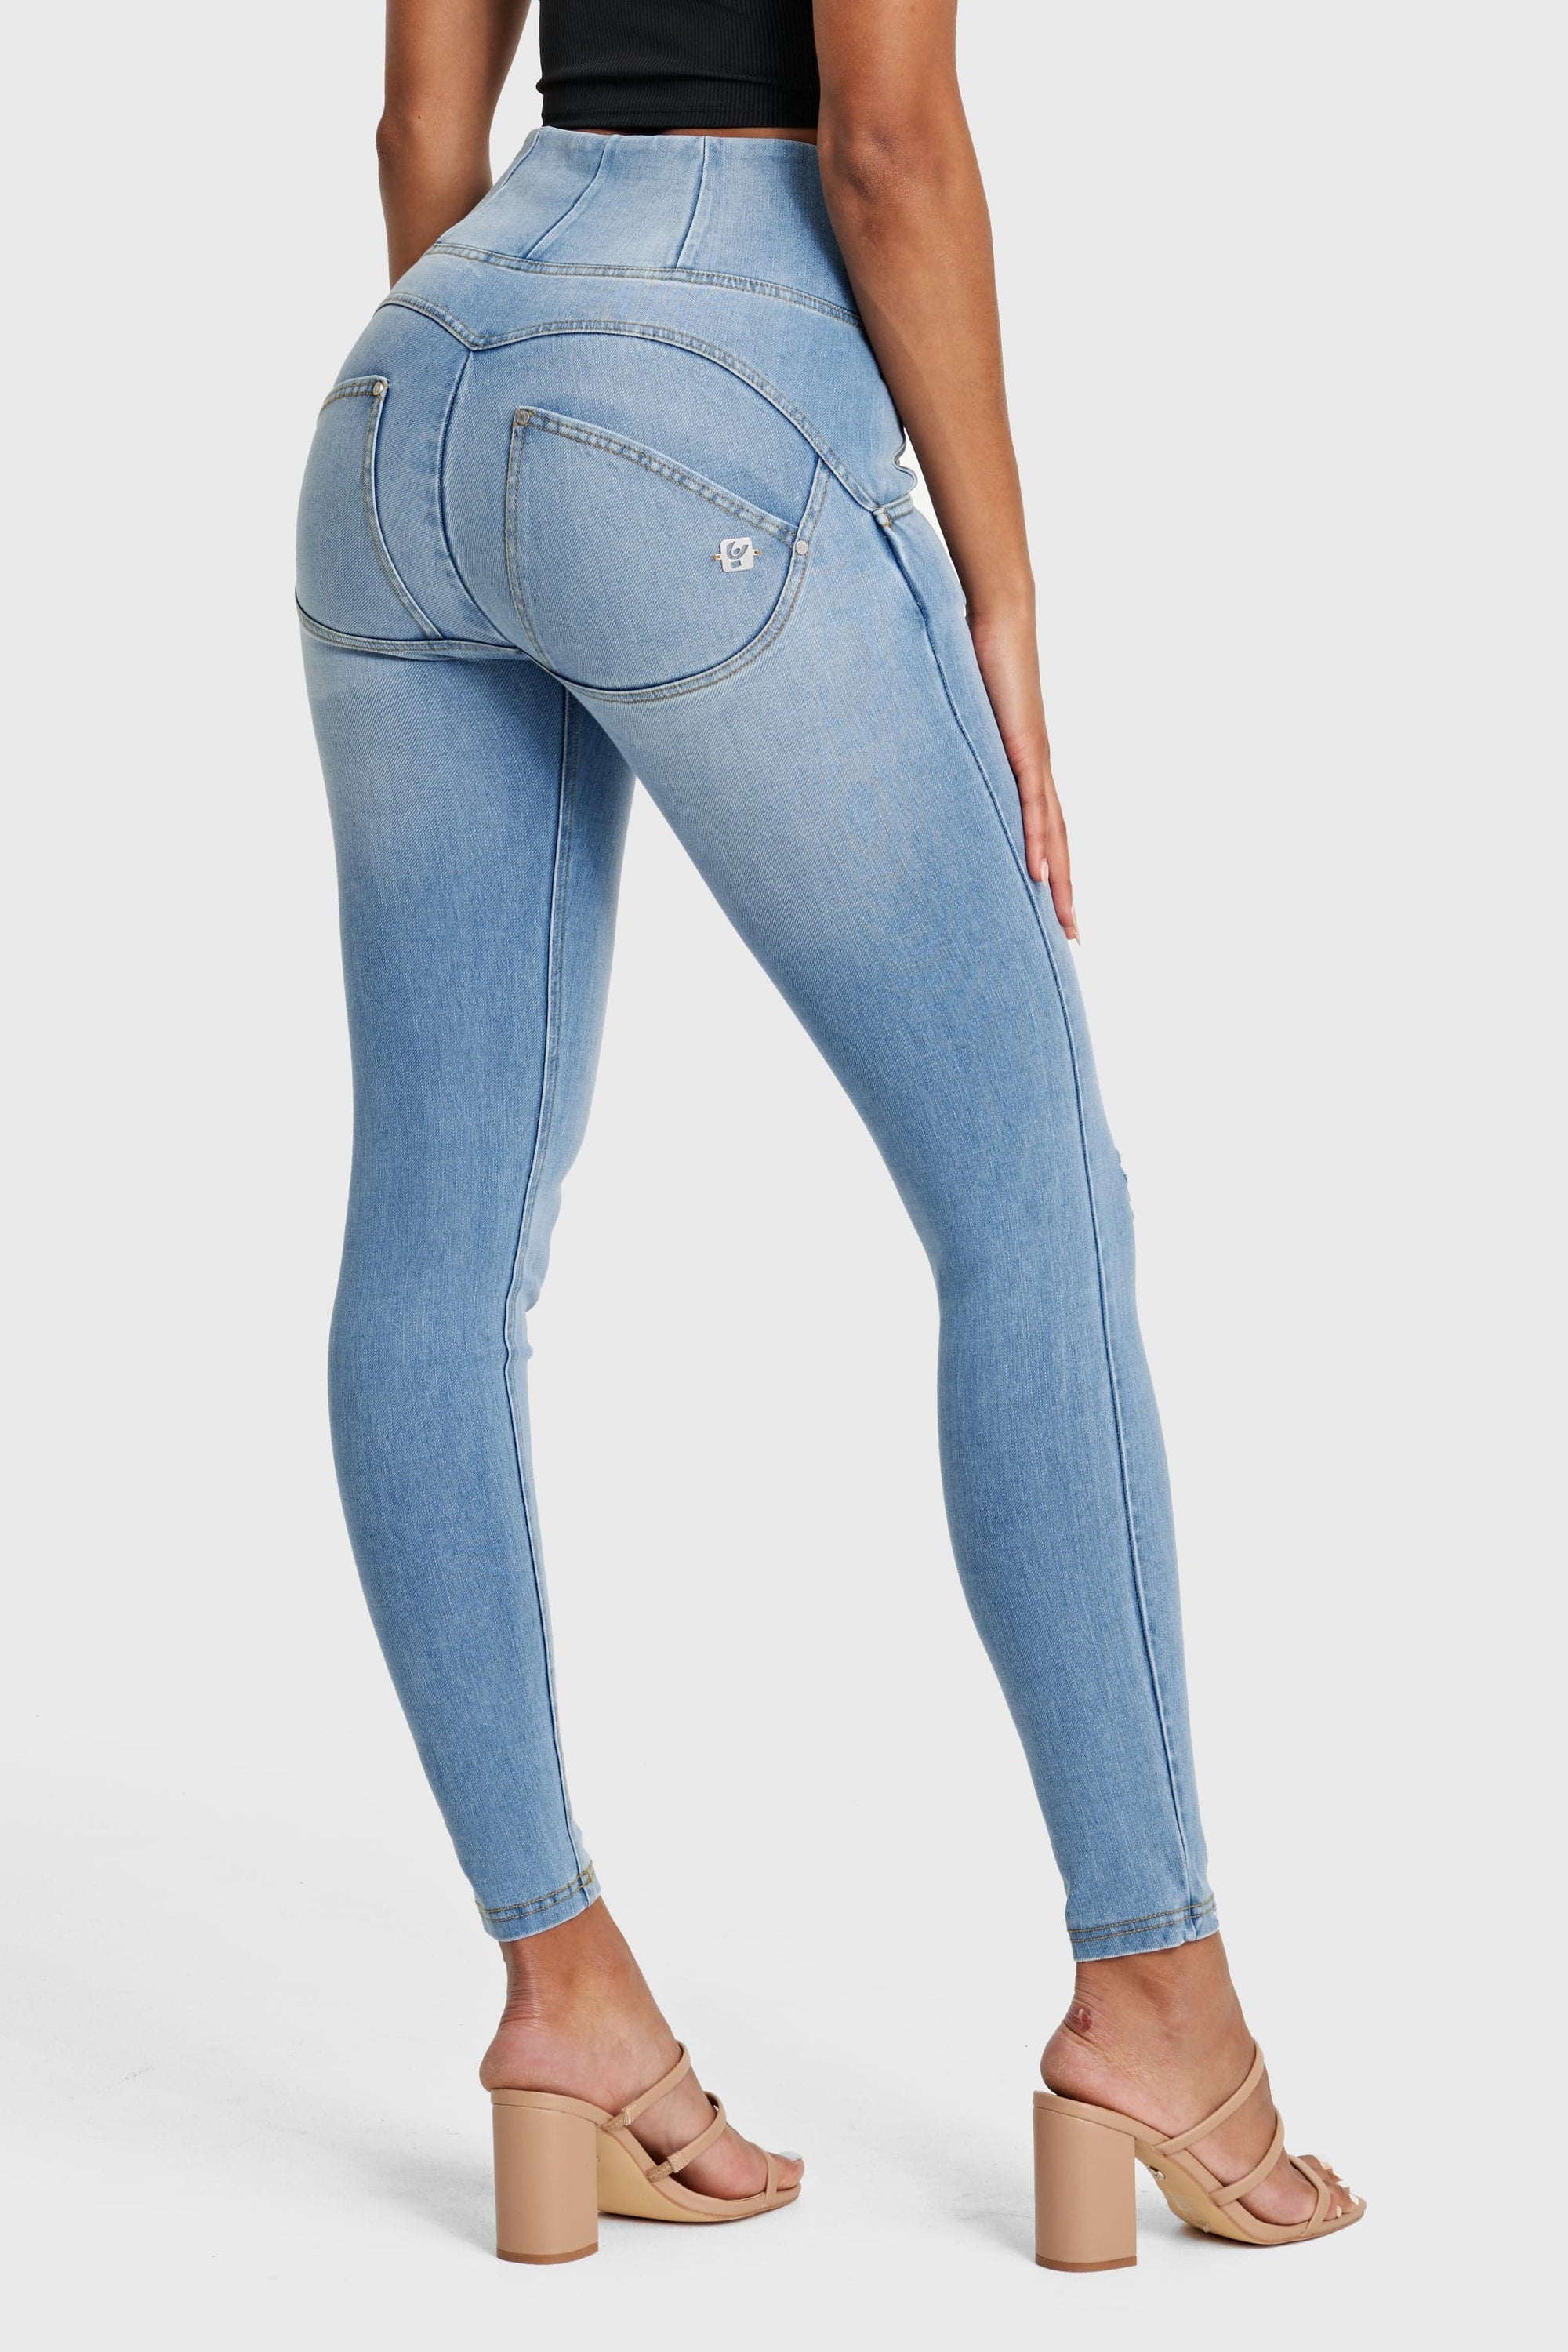 WR.UP® Snug Distressed Jeans - High Waisted - Full Length - Light Blue + Yellow Stitching 7